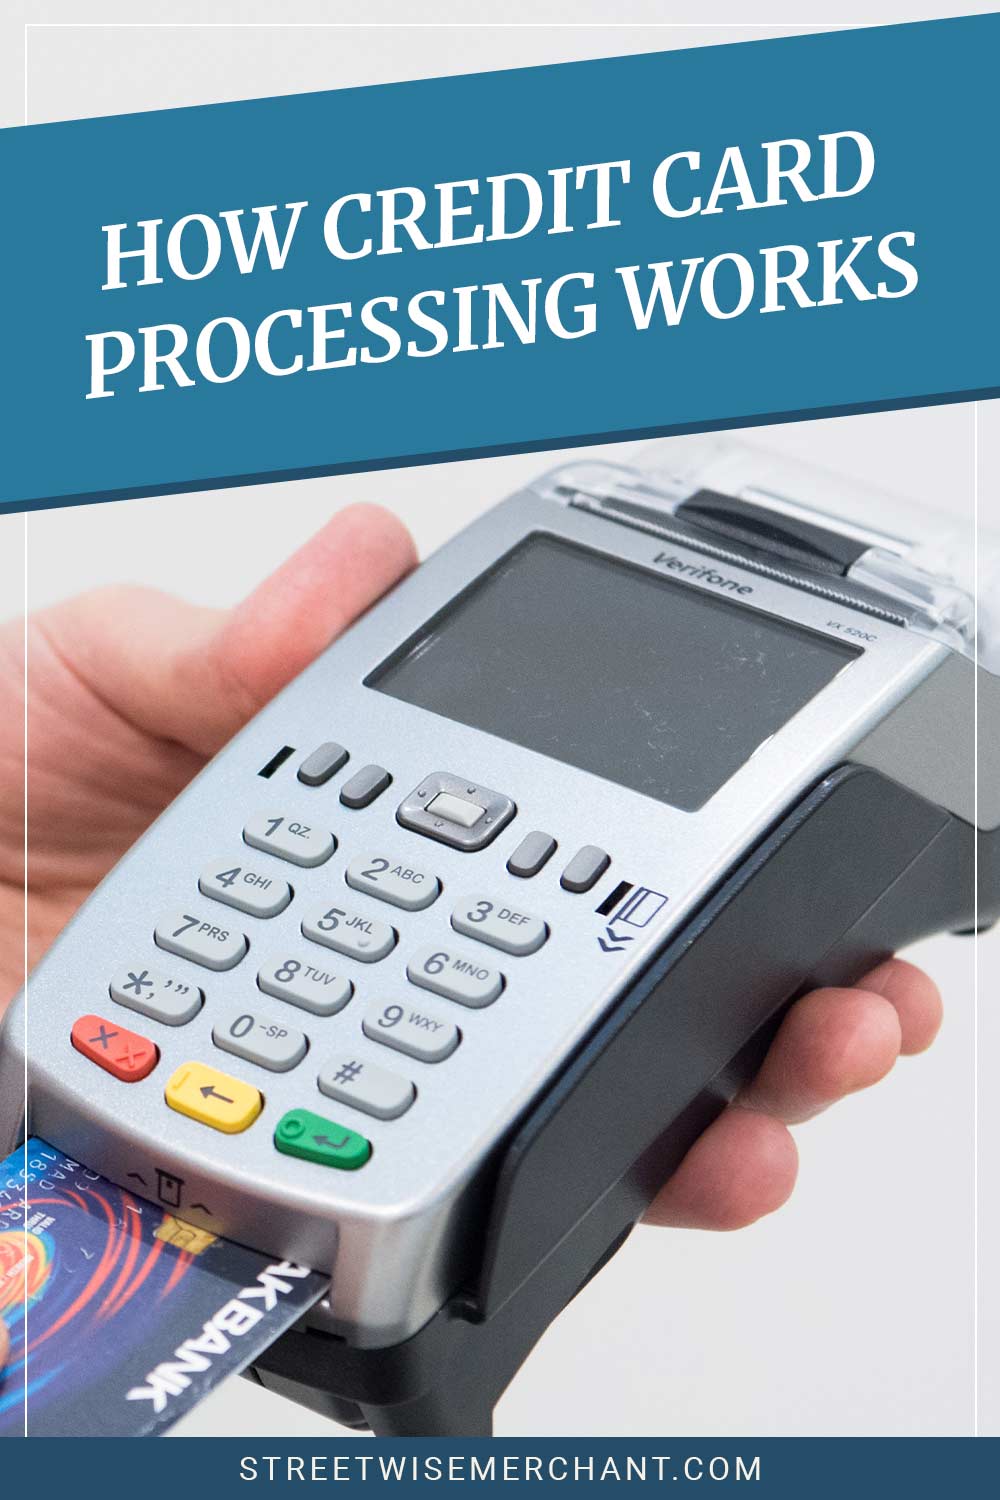 Person holding a credit card machine and insert a card into it - How Credit Card Processing Works?